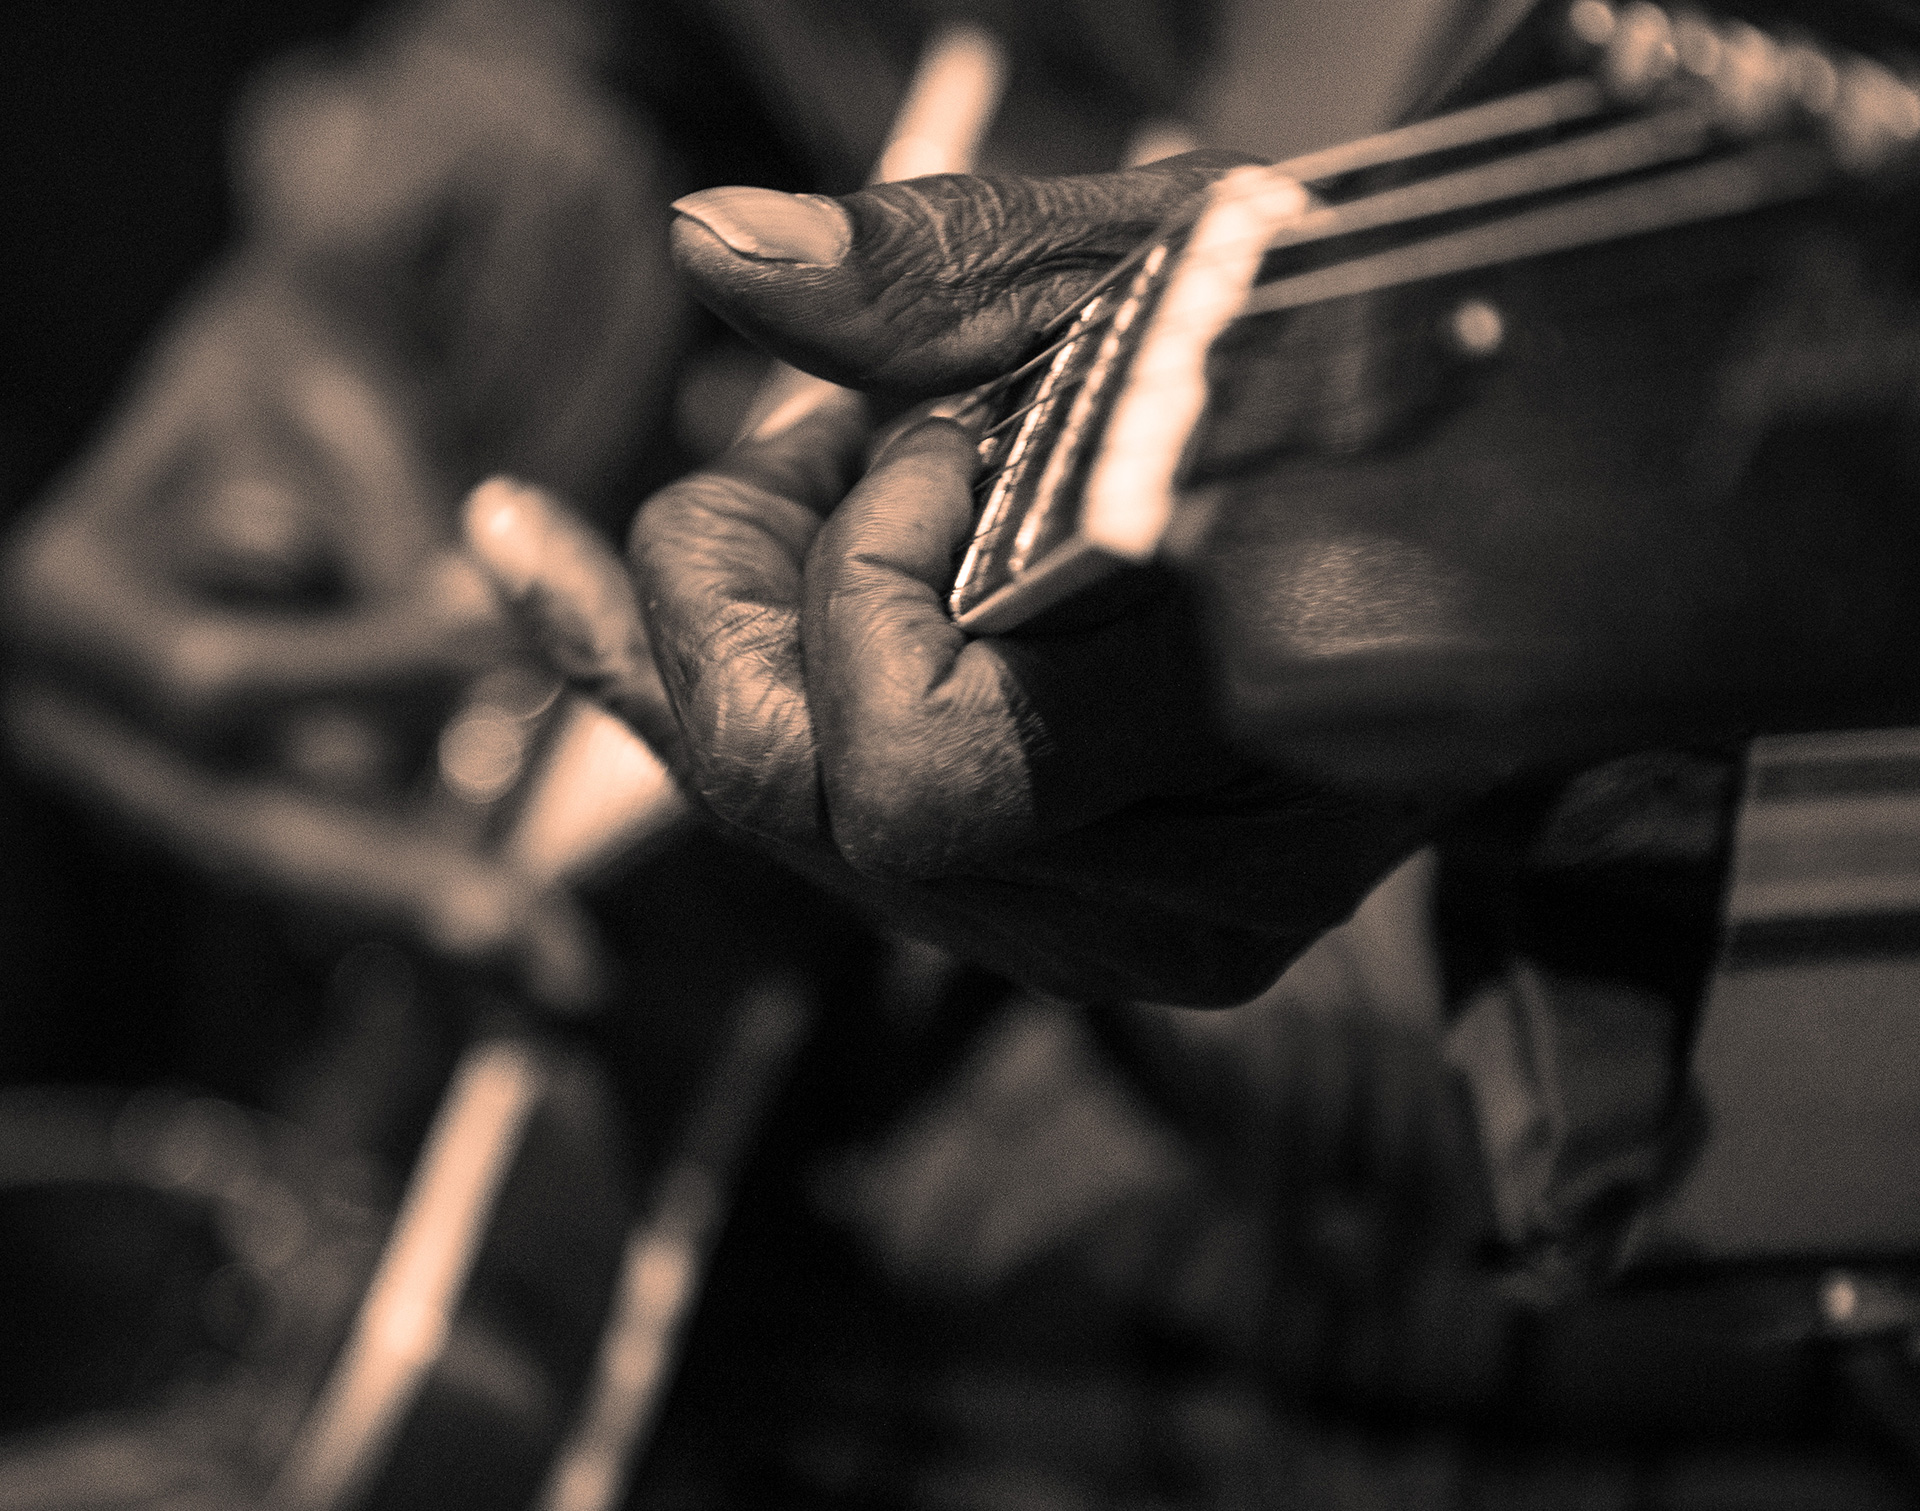 CONDENSED-guitar-hands-BW